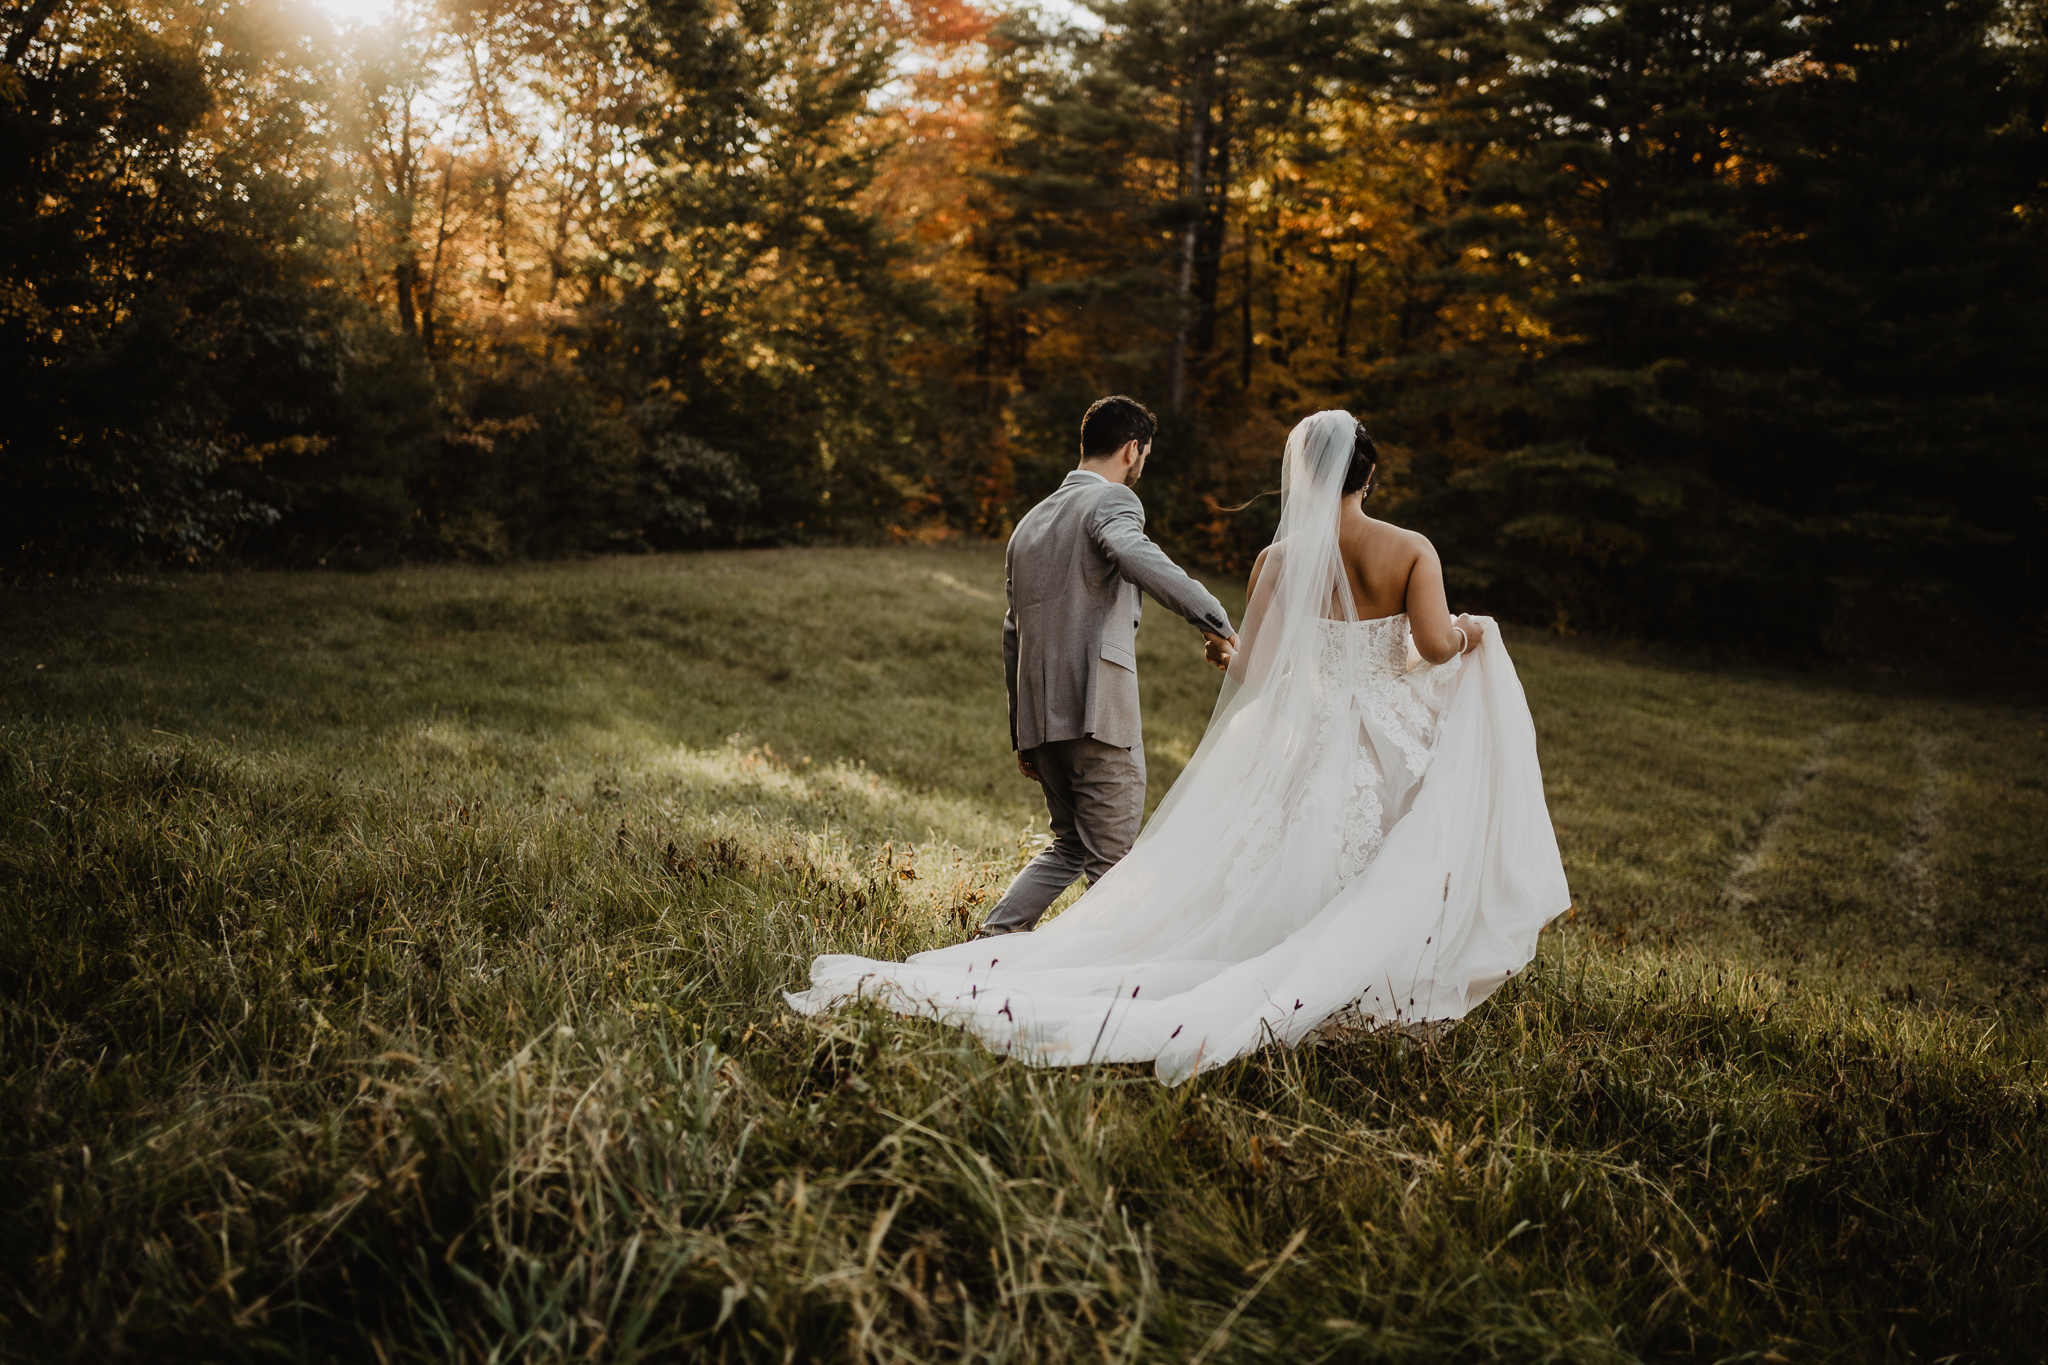 dark and moody sunset photos with bride and groom